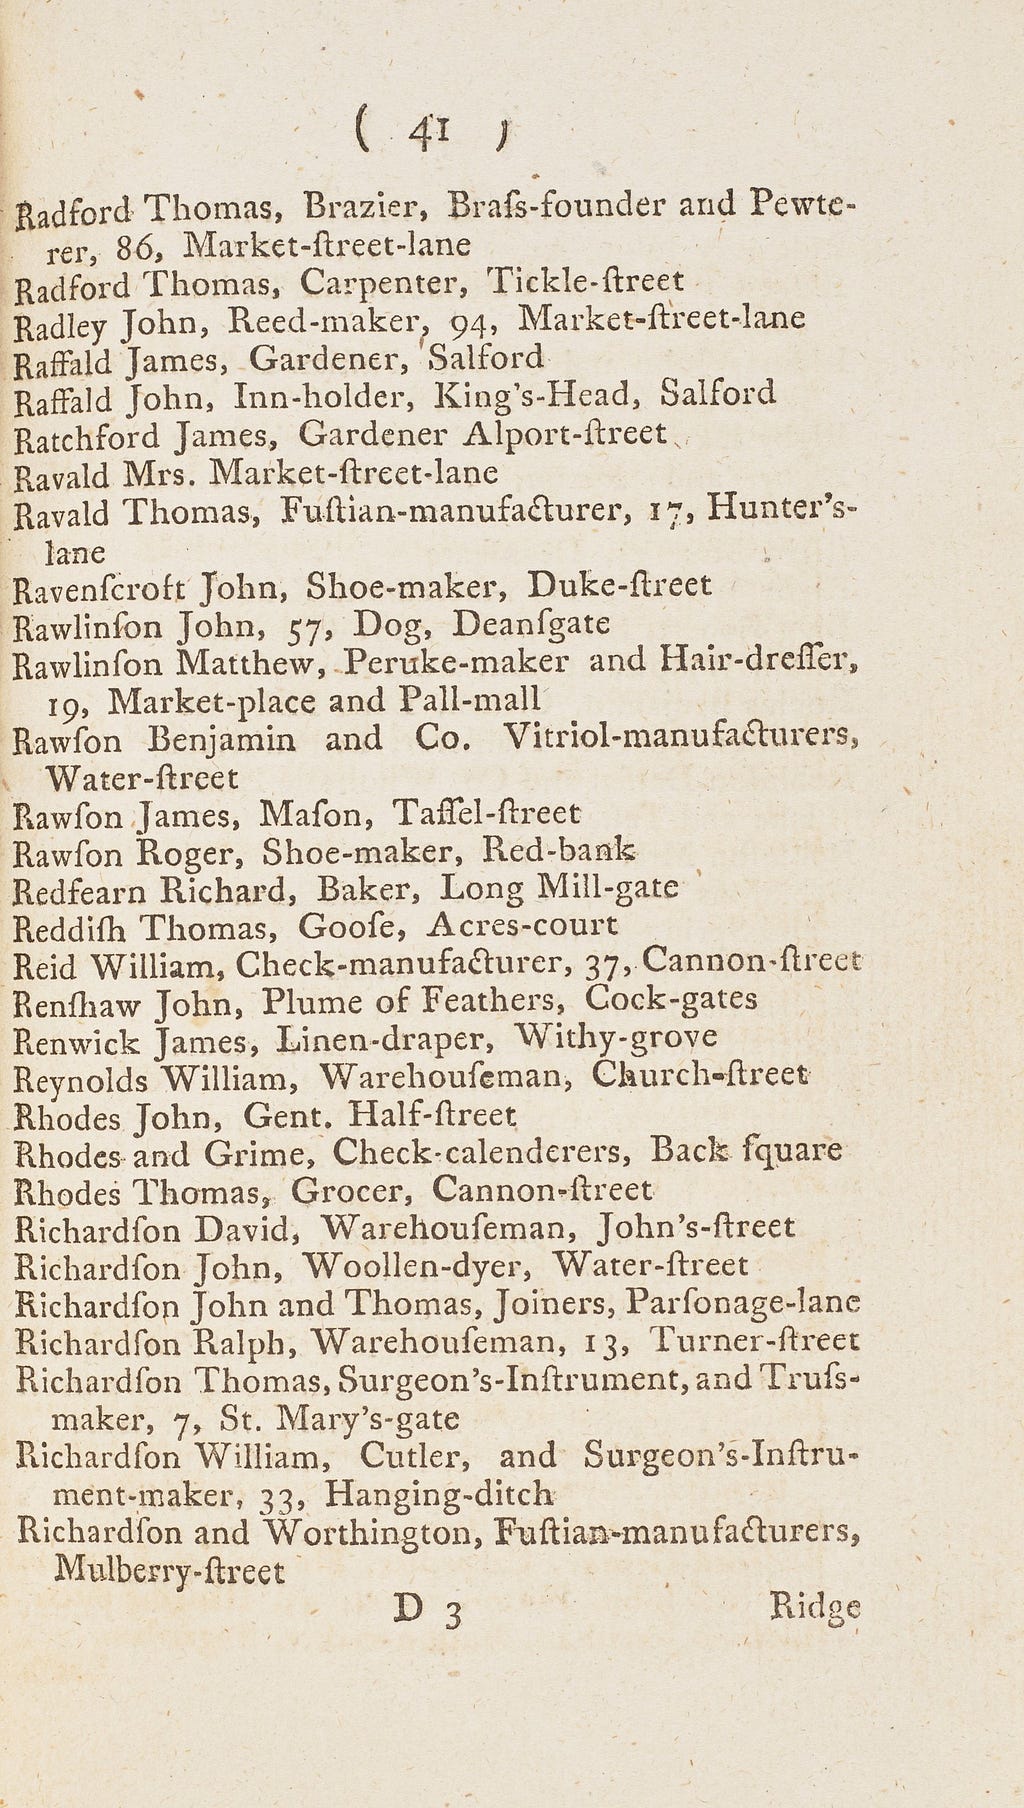 Page 41 of a Manchester trade directory listing names from Radford to Richardson.